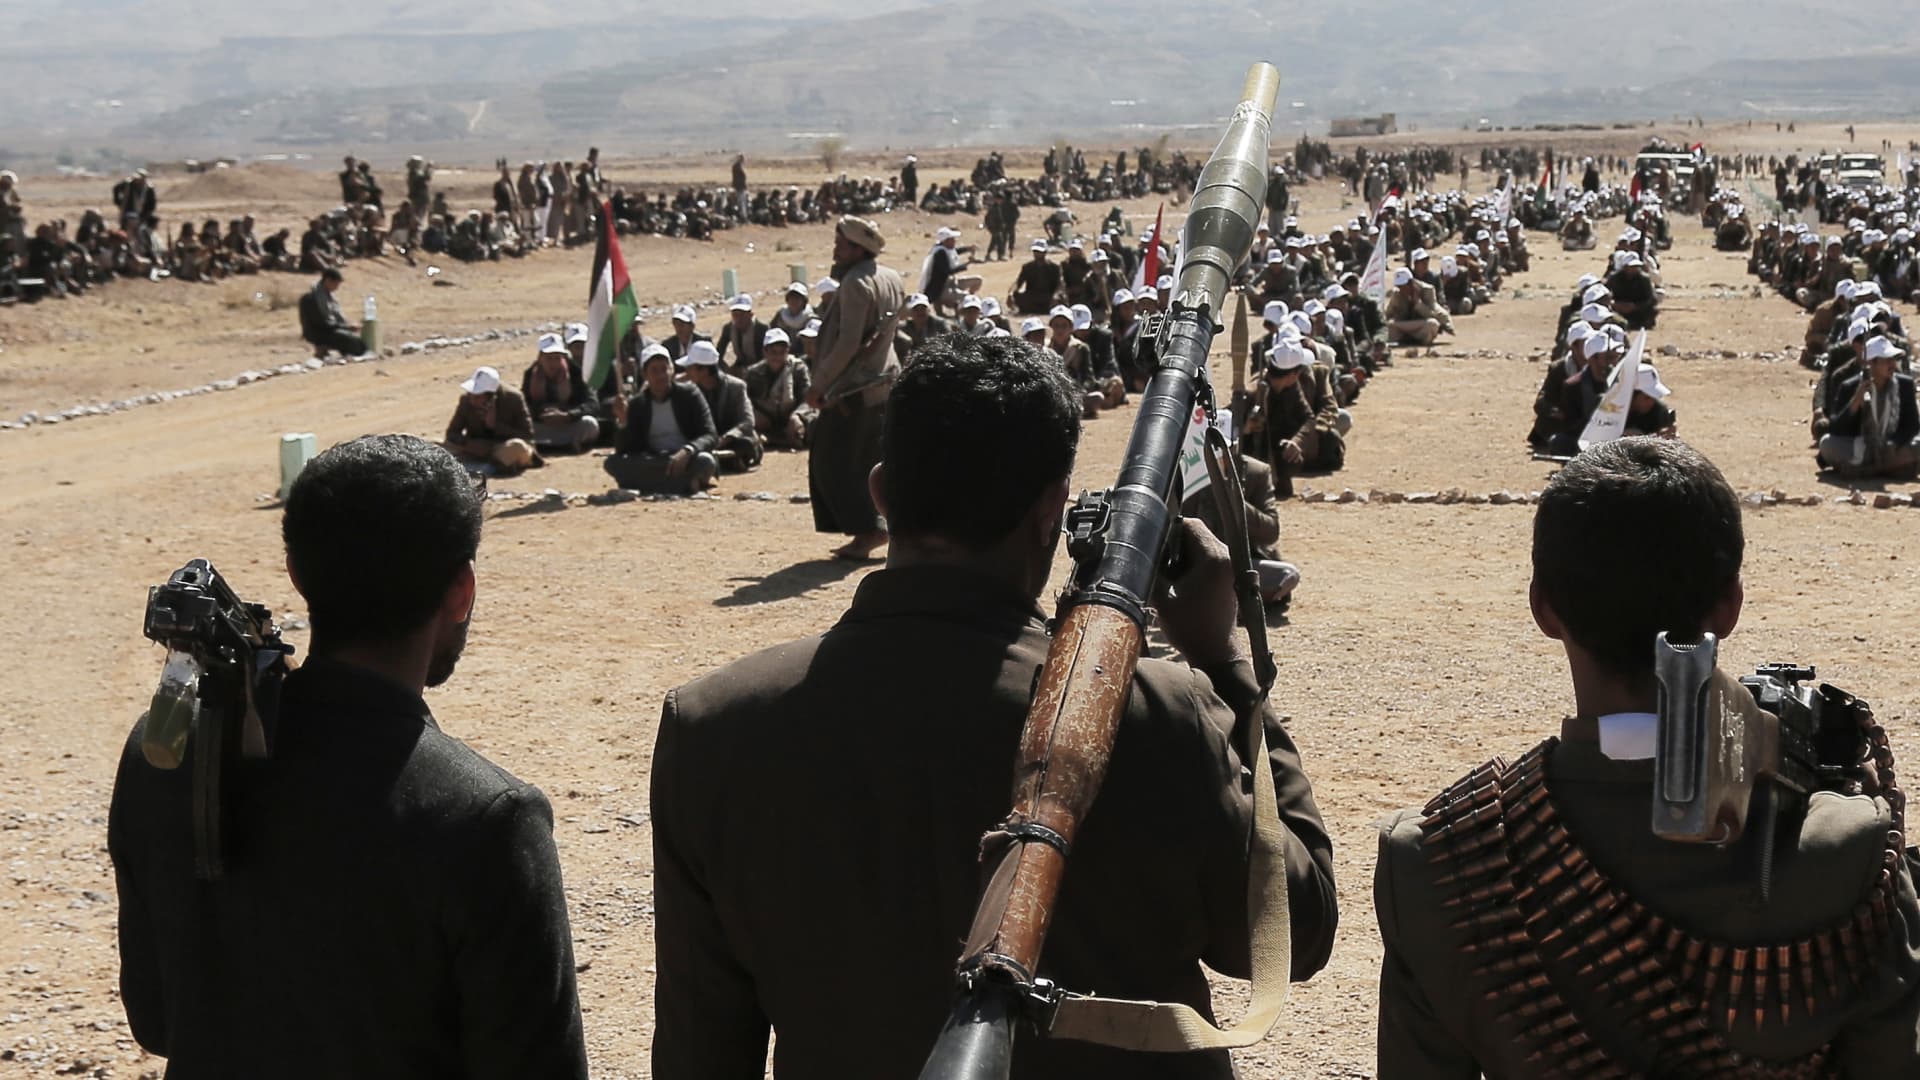 A view of Houthi supporters on January 22, 2024 gathering while carrying heavy weapons and chanting slogans.